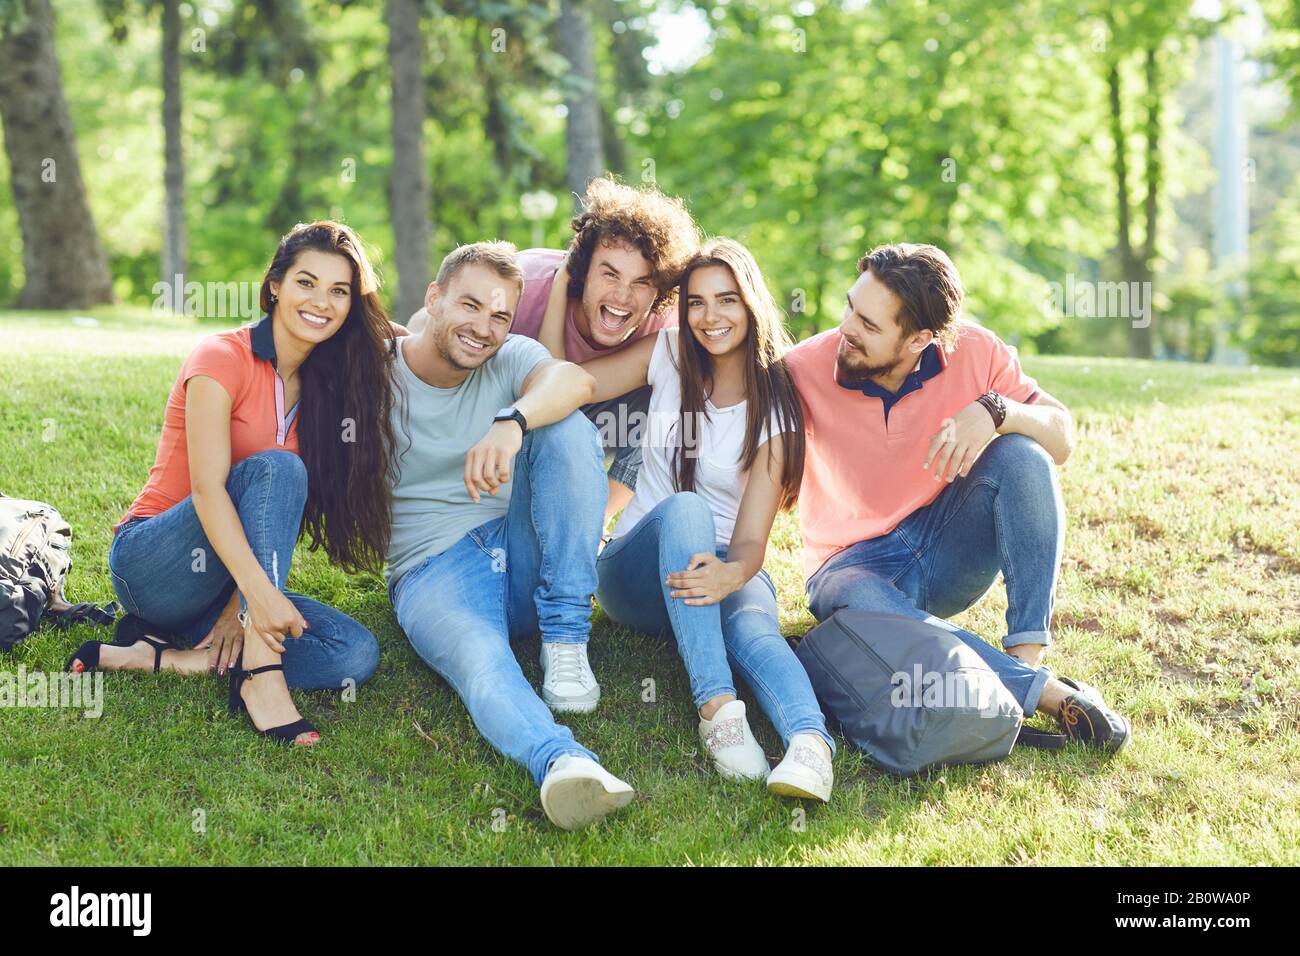 Friends fun sitting on the grass in a city park Stock Photo